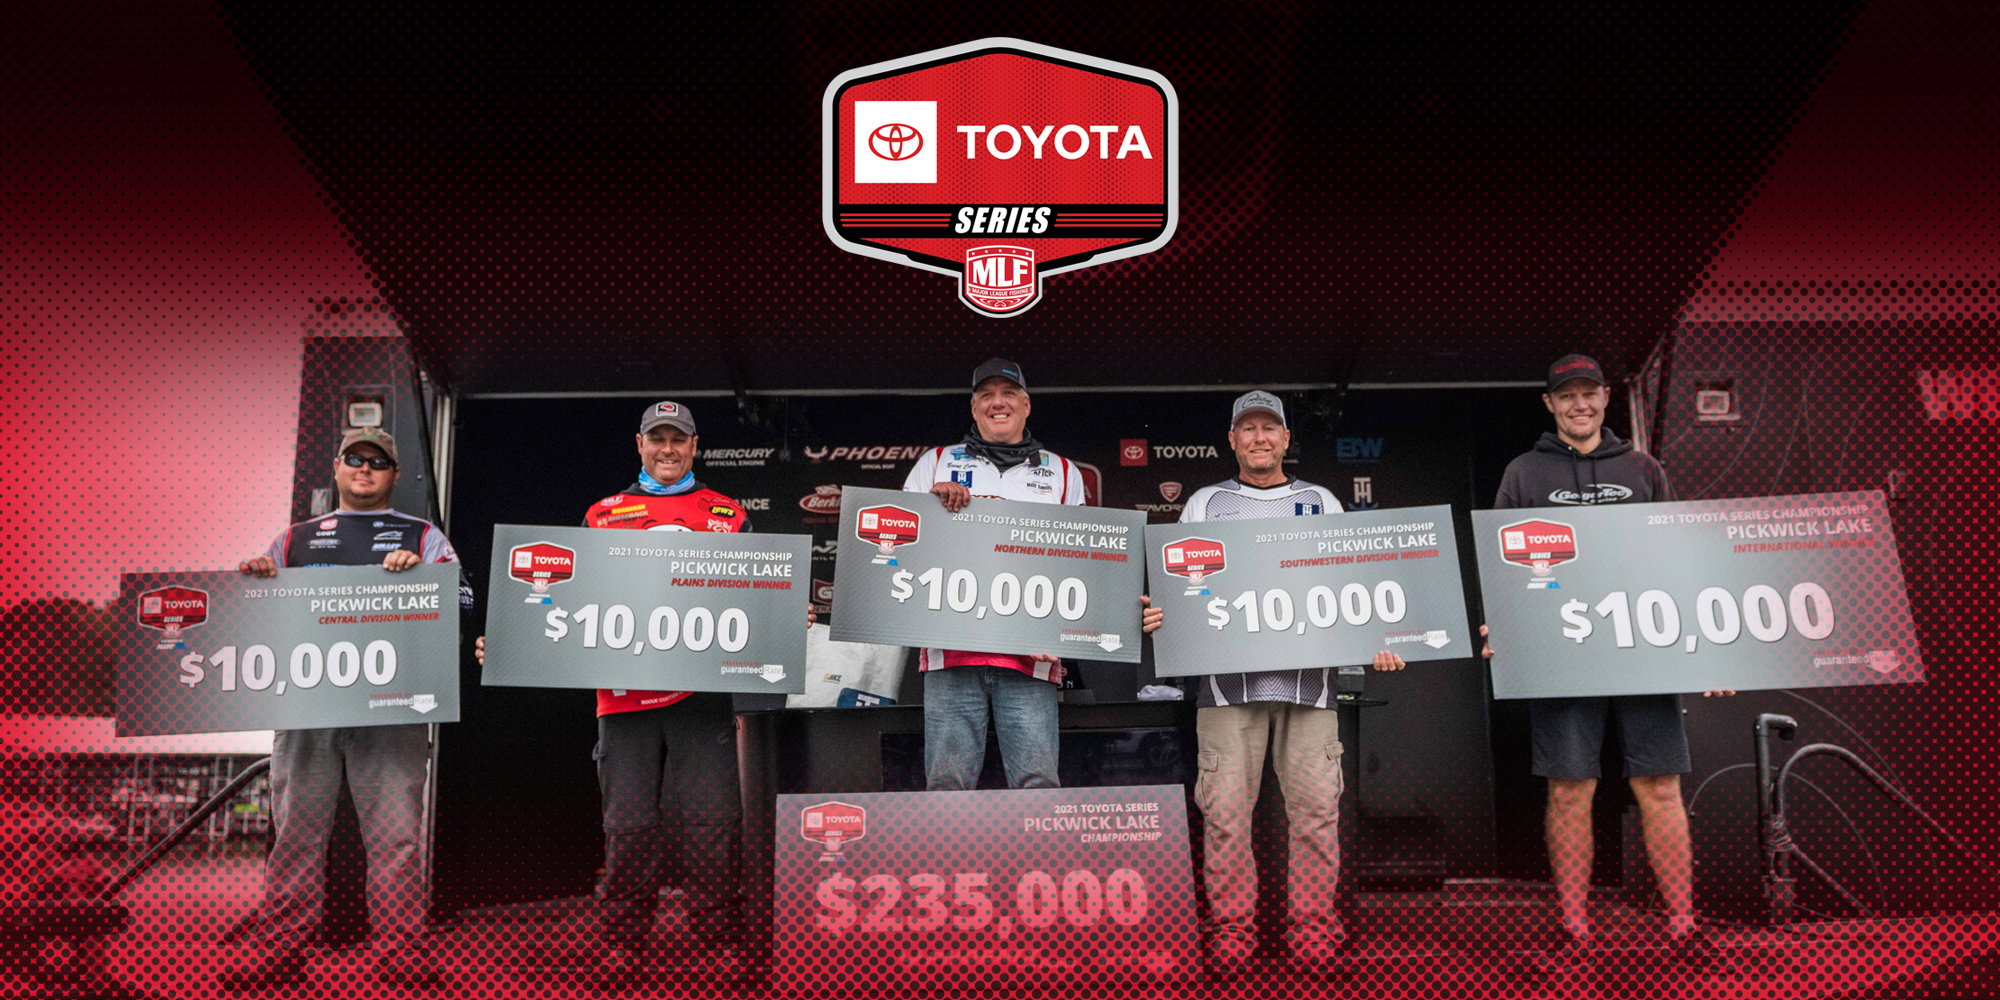 Sign Up for the 2022 Toyota Series to Win Big Major League Fishing